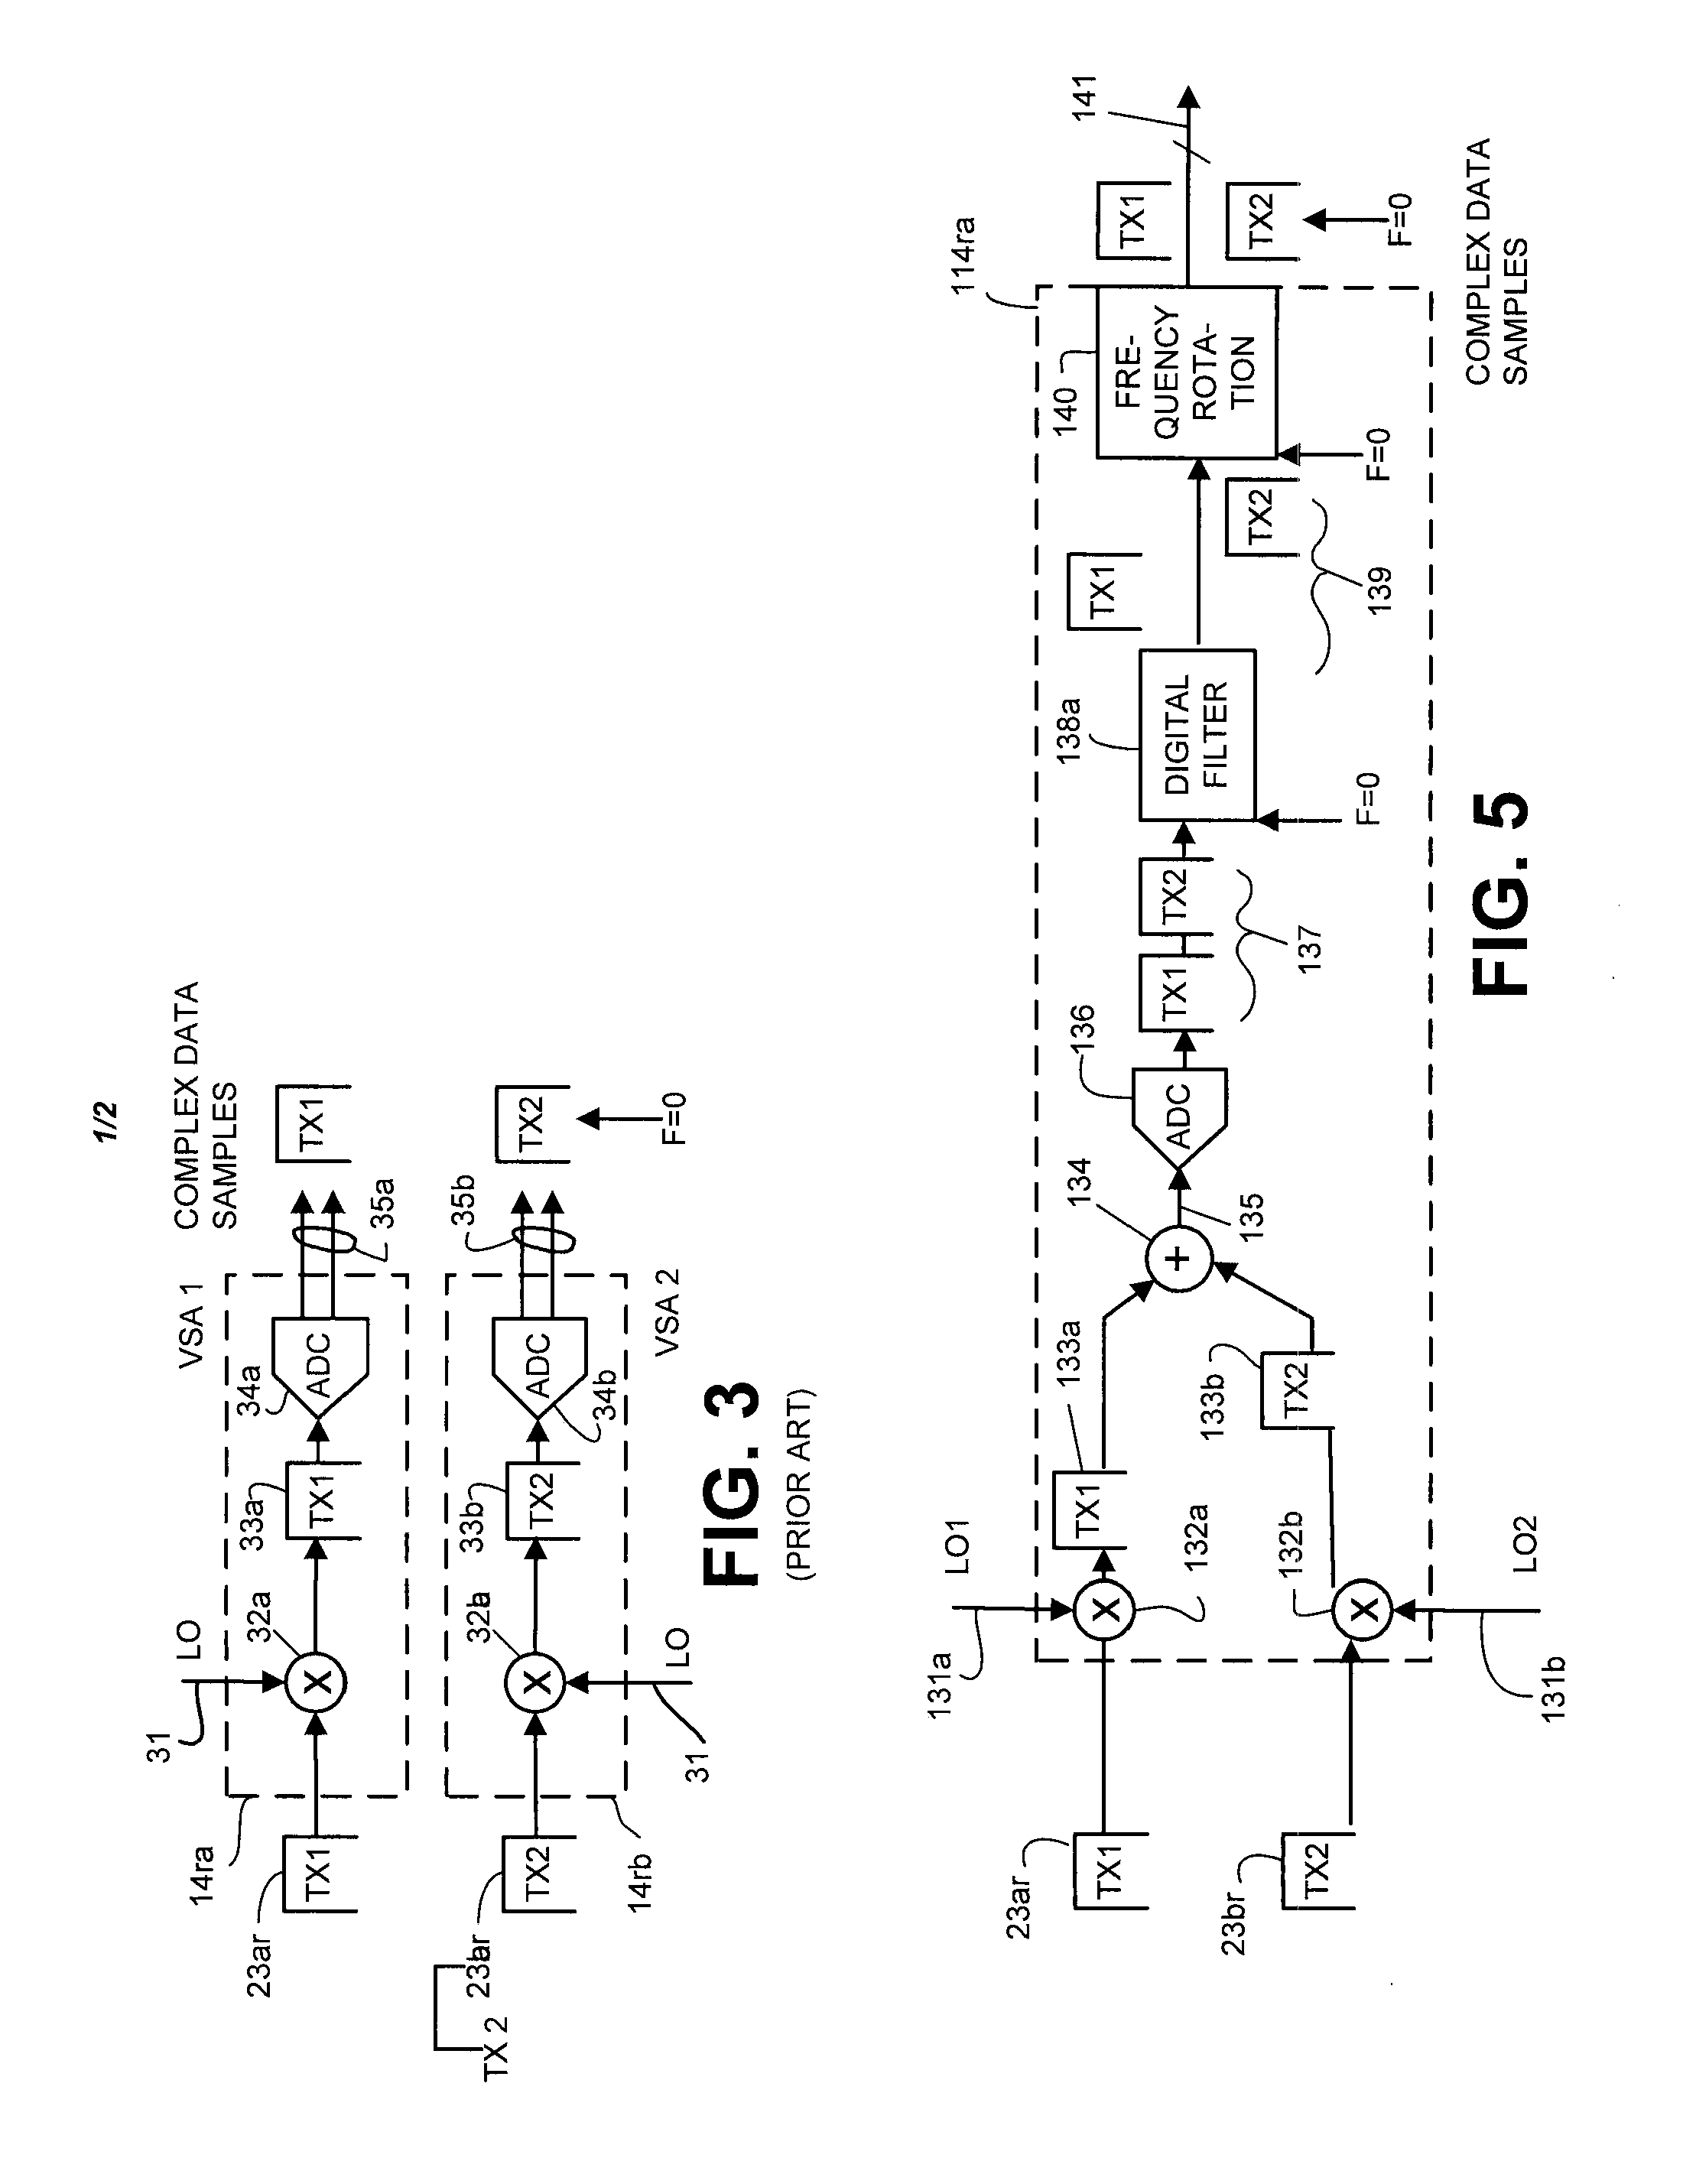 System and method for simultaneous MIMO signal testing with single vector signal analyzer